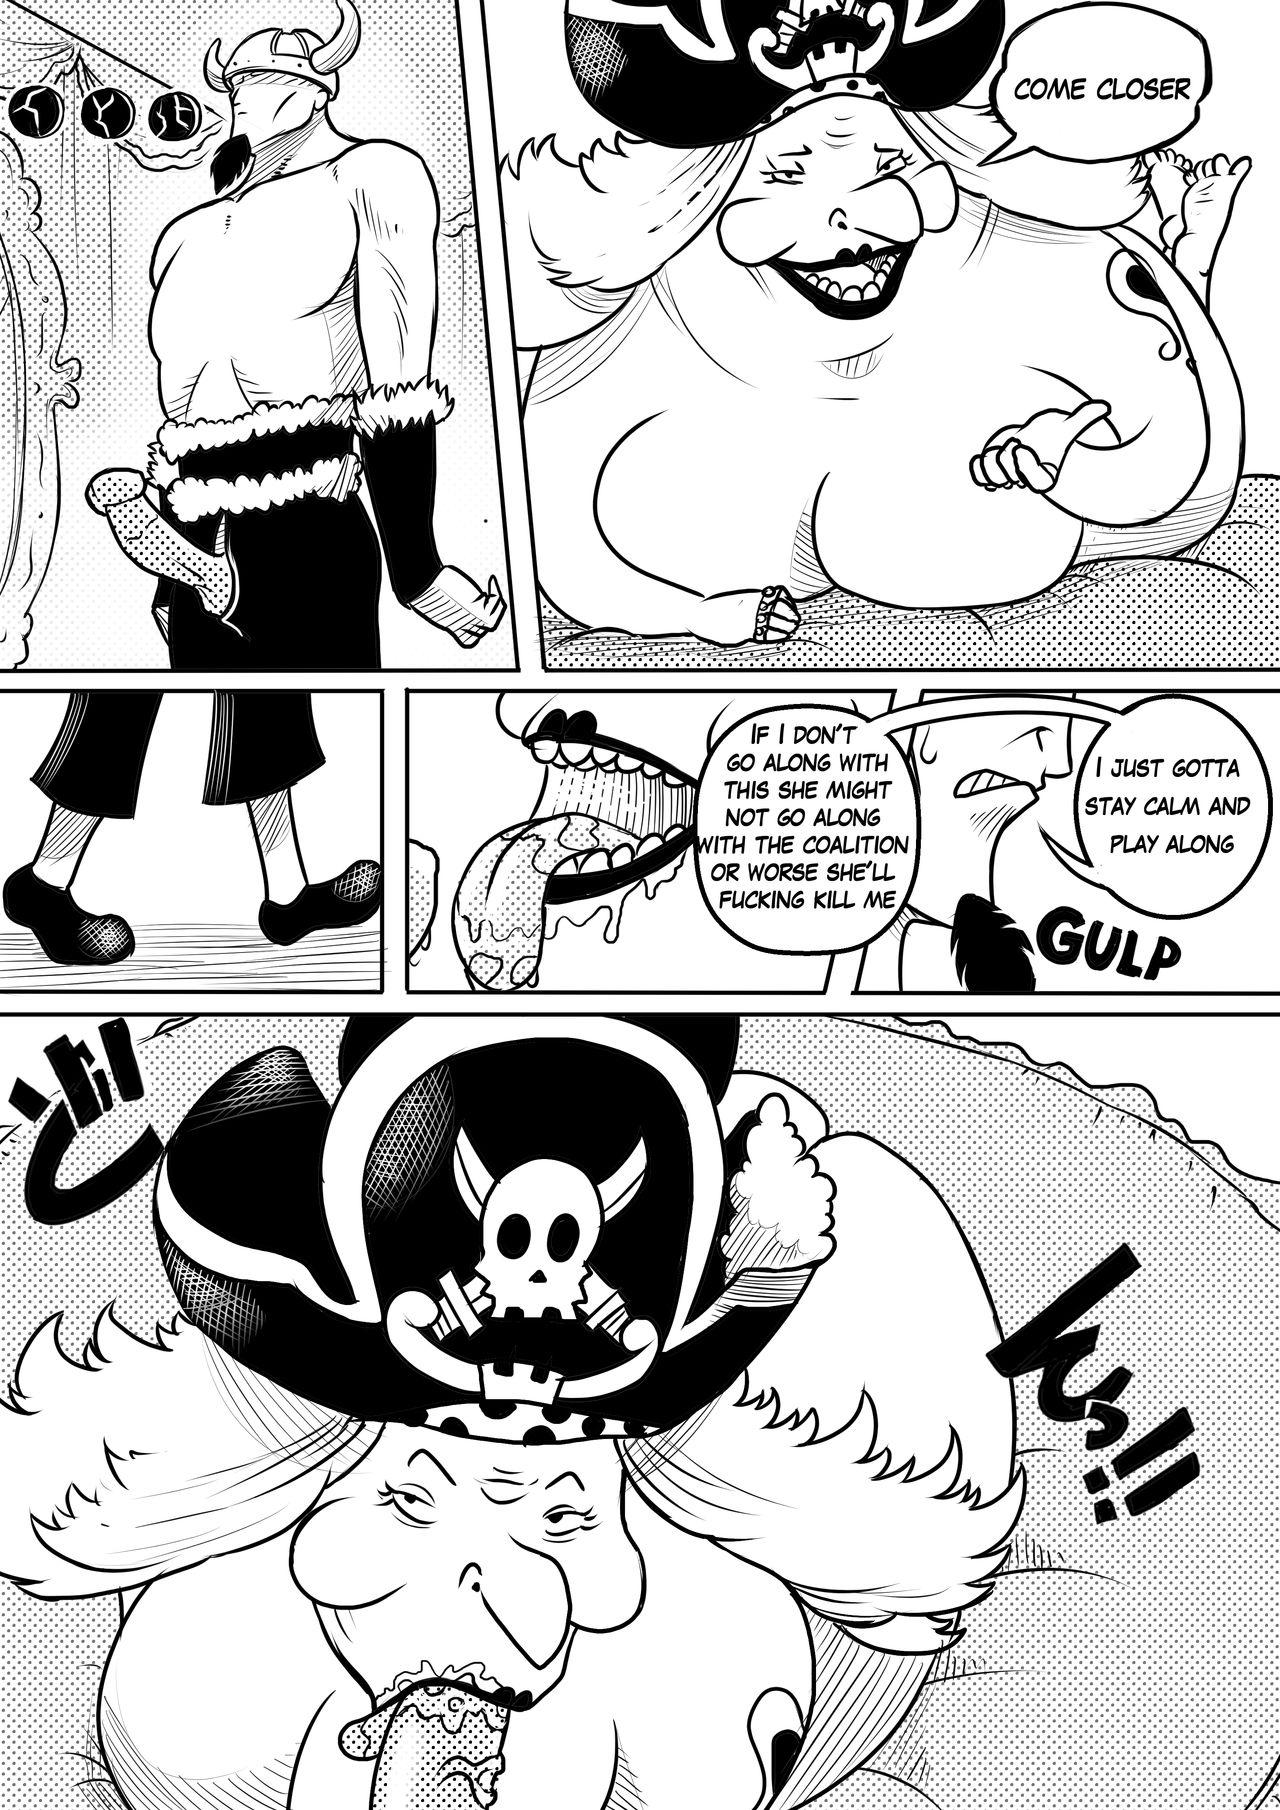 Charlotte Linlin XXX Page 7 Of 17 one piece hentai haven, Charlotte Linlin ...